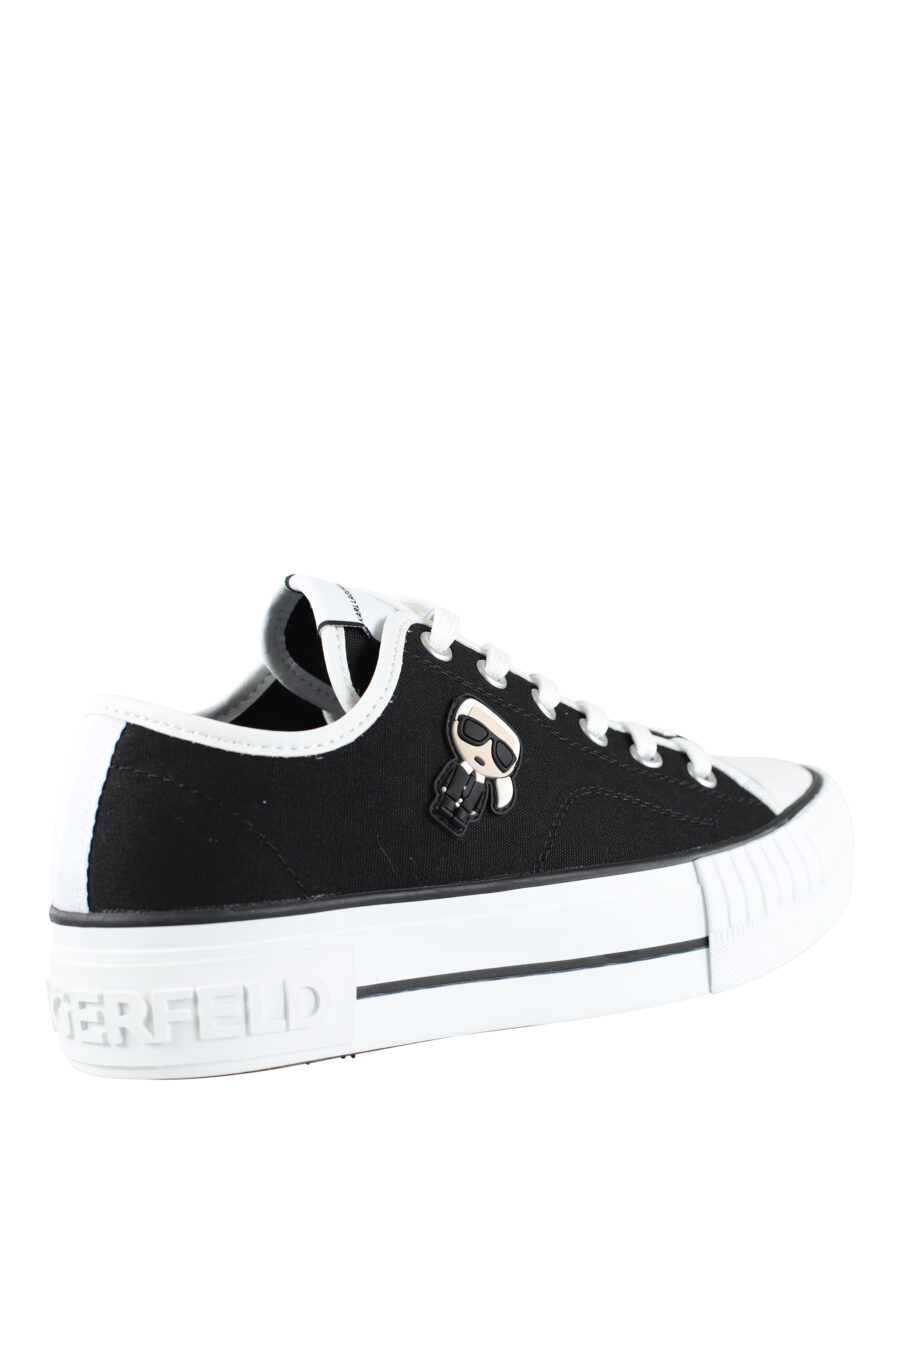 Black converse style trainers with rubber "karl" logo - IMG 9577